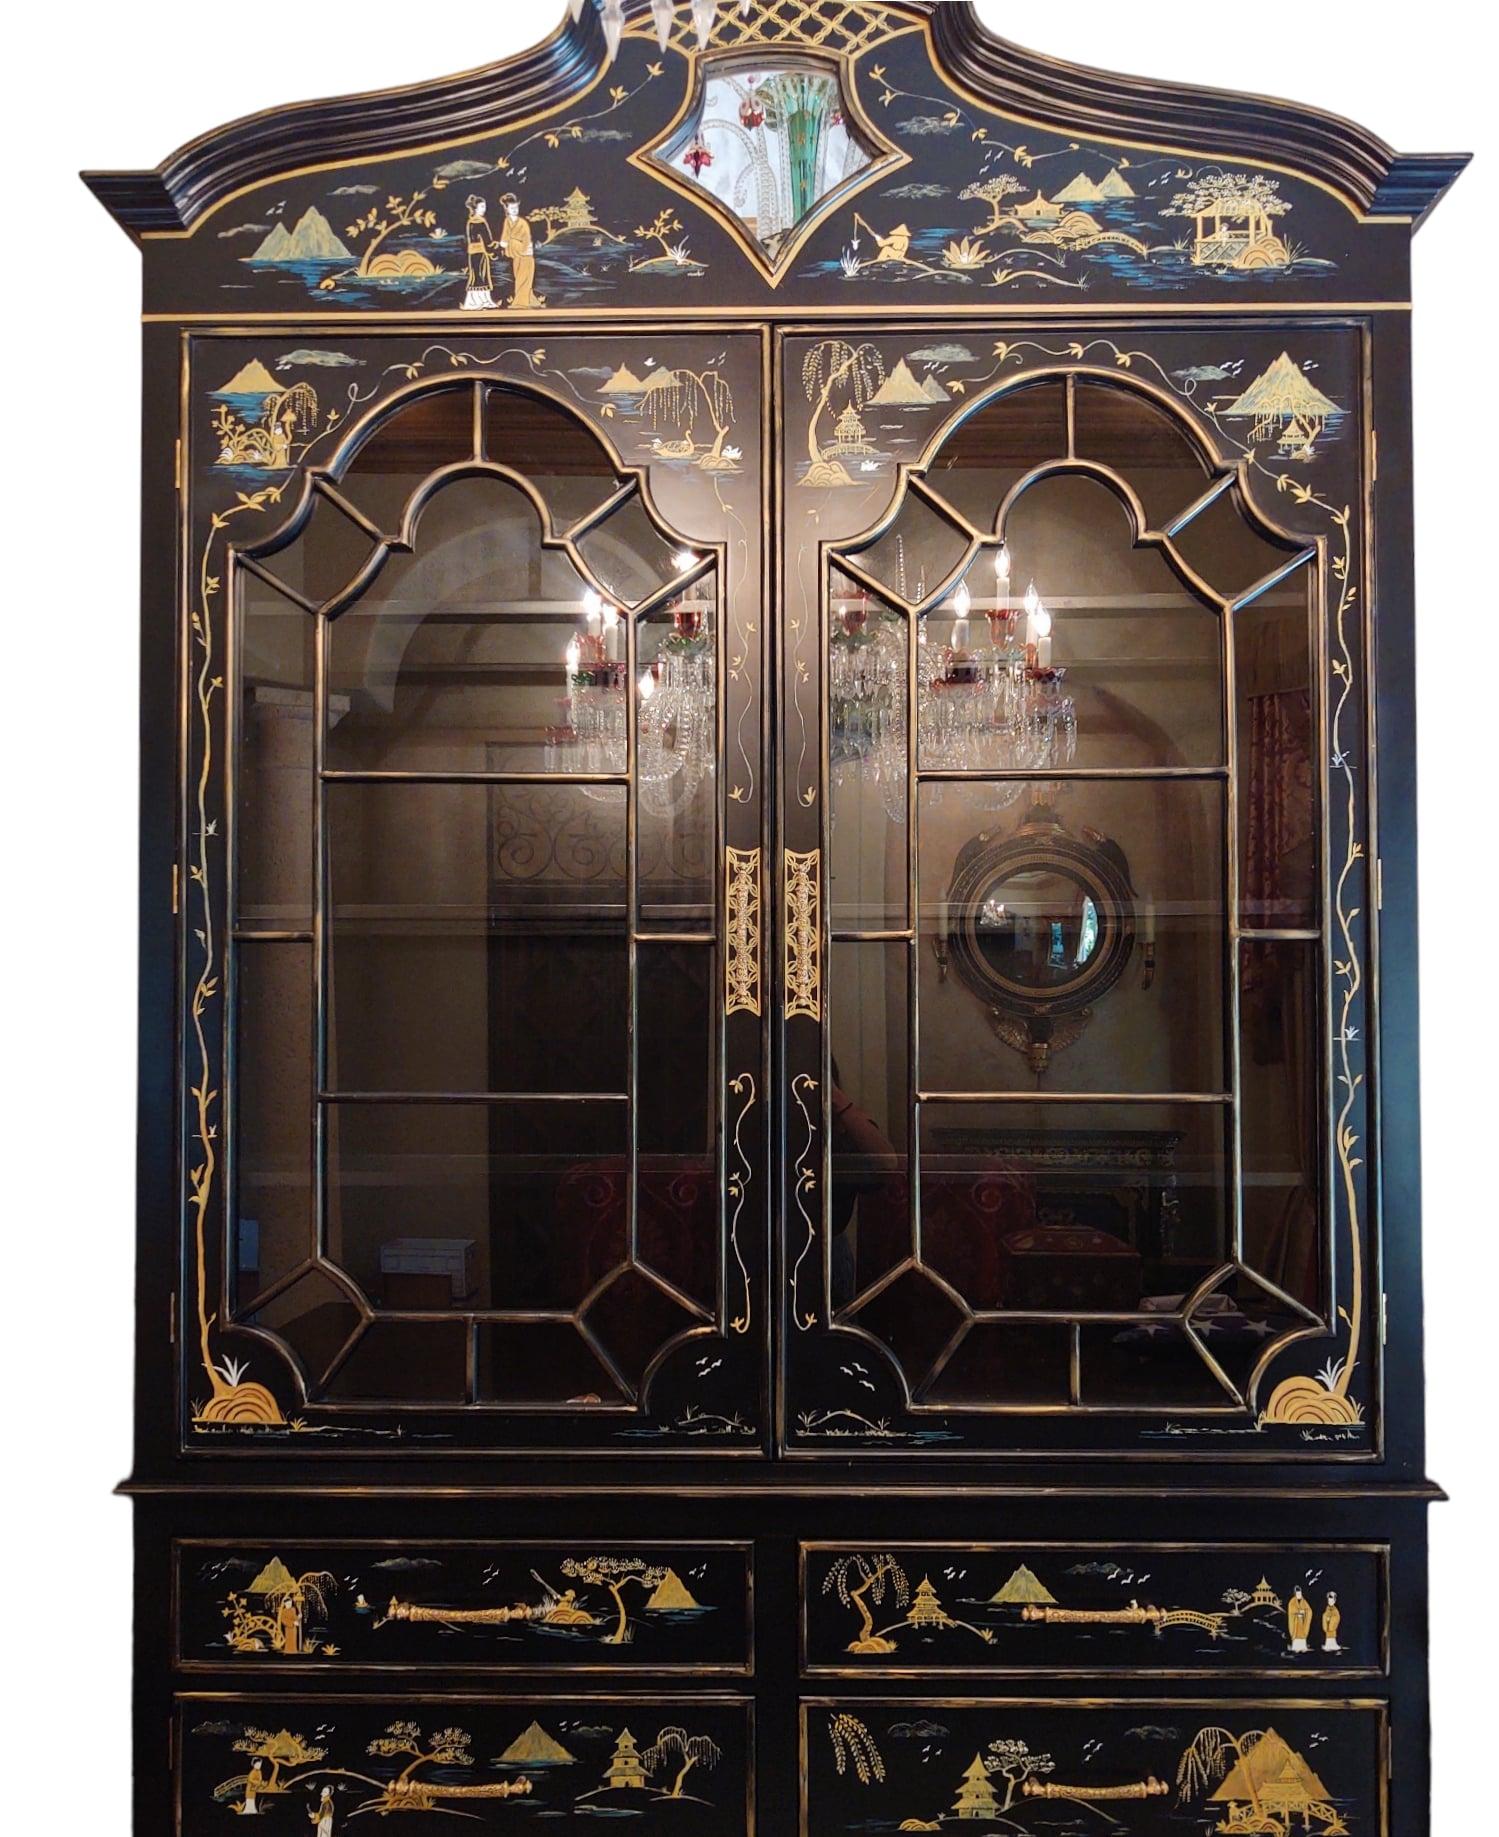 This large-scale custom-built Chinoiserie-style display hutch is of one-piece construction and stands 9.5 feet tall. It has six drop-front drawers for easy access. The upper display part features three glass shelves which make for four display